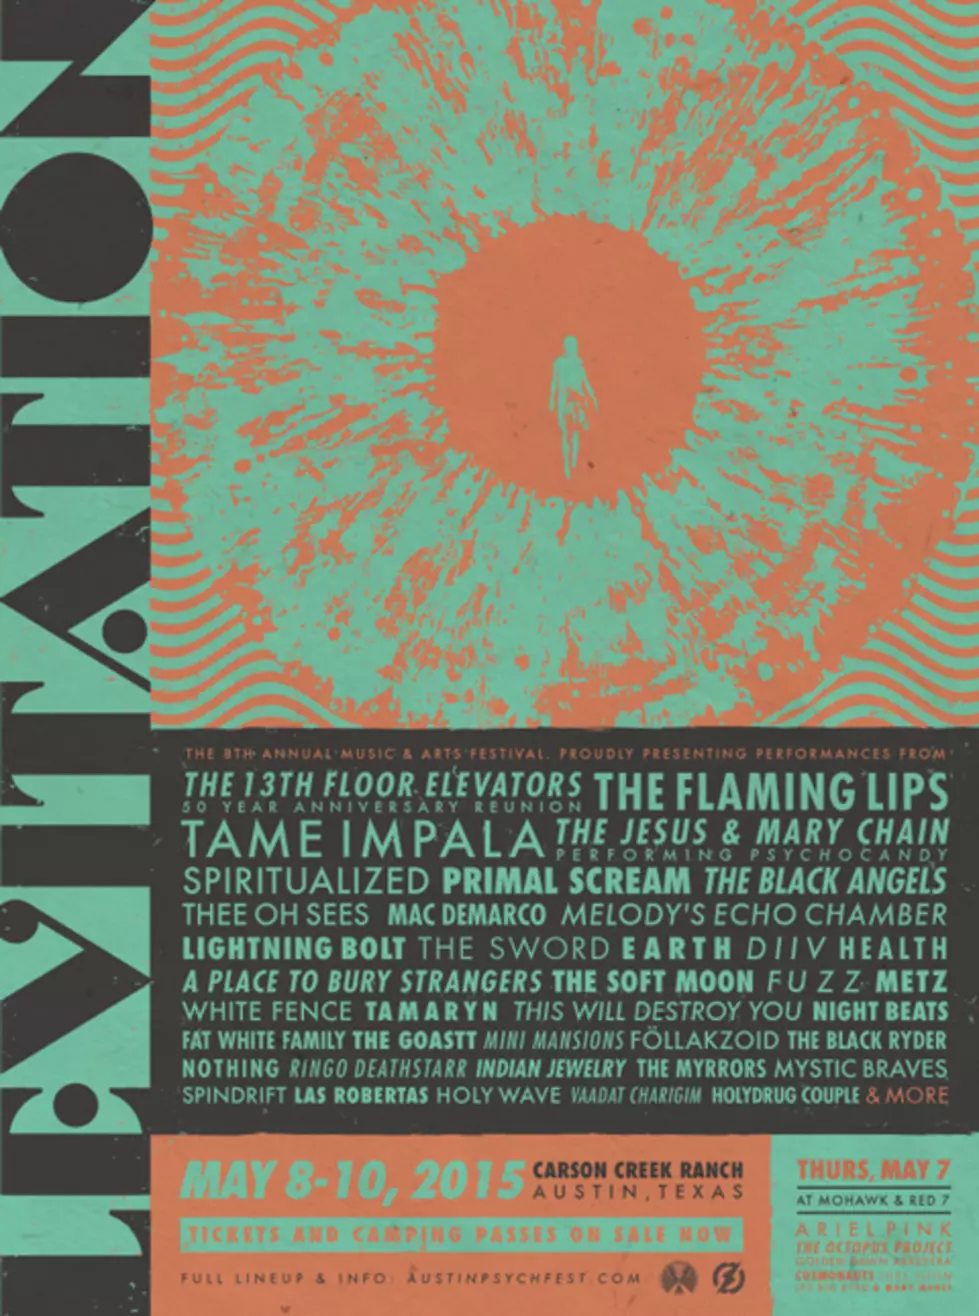 Austin Psych Fest finalizes Levitation 2015 lineup, announces campground stage and more